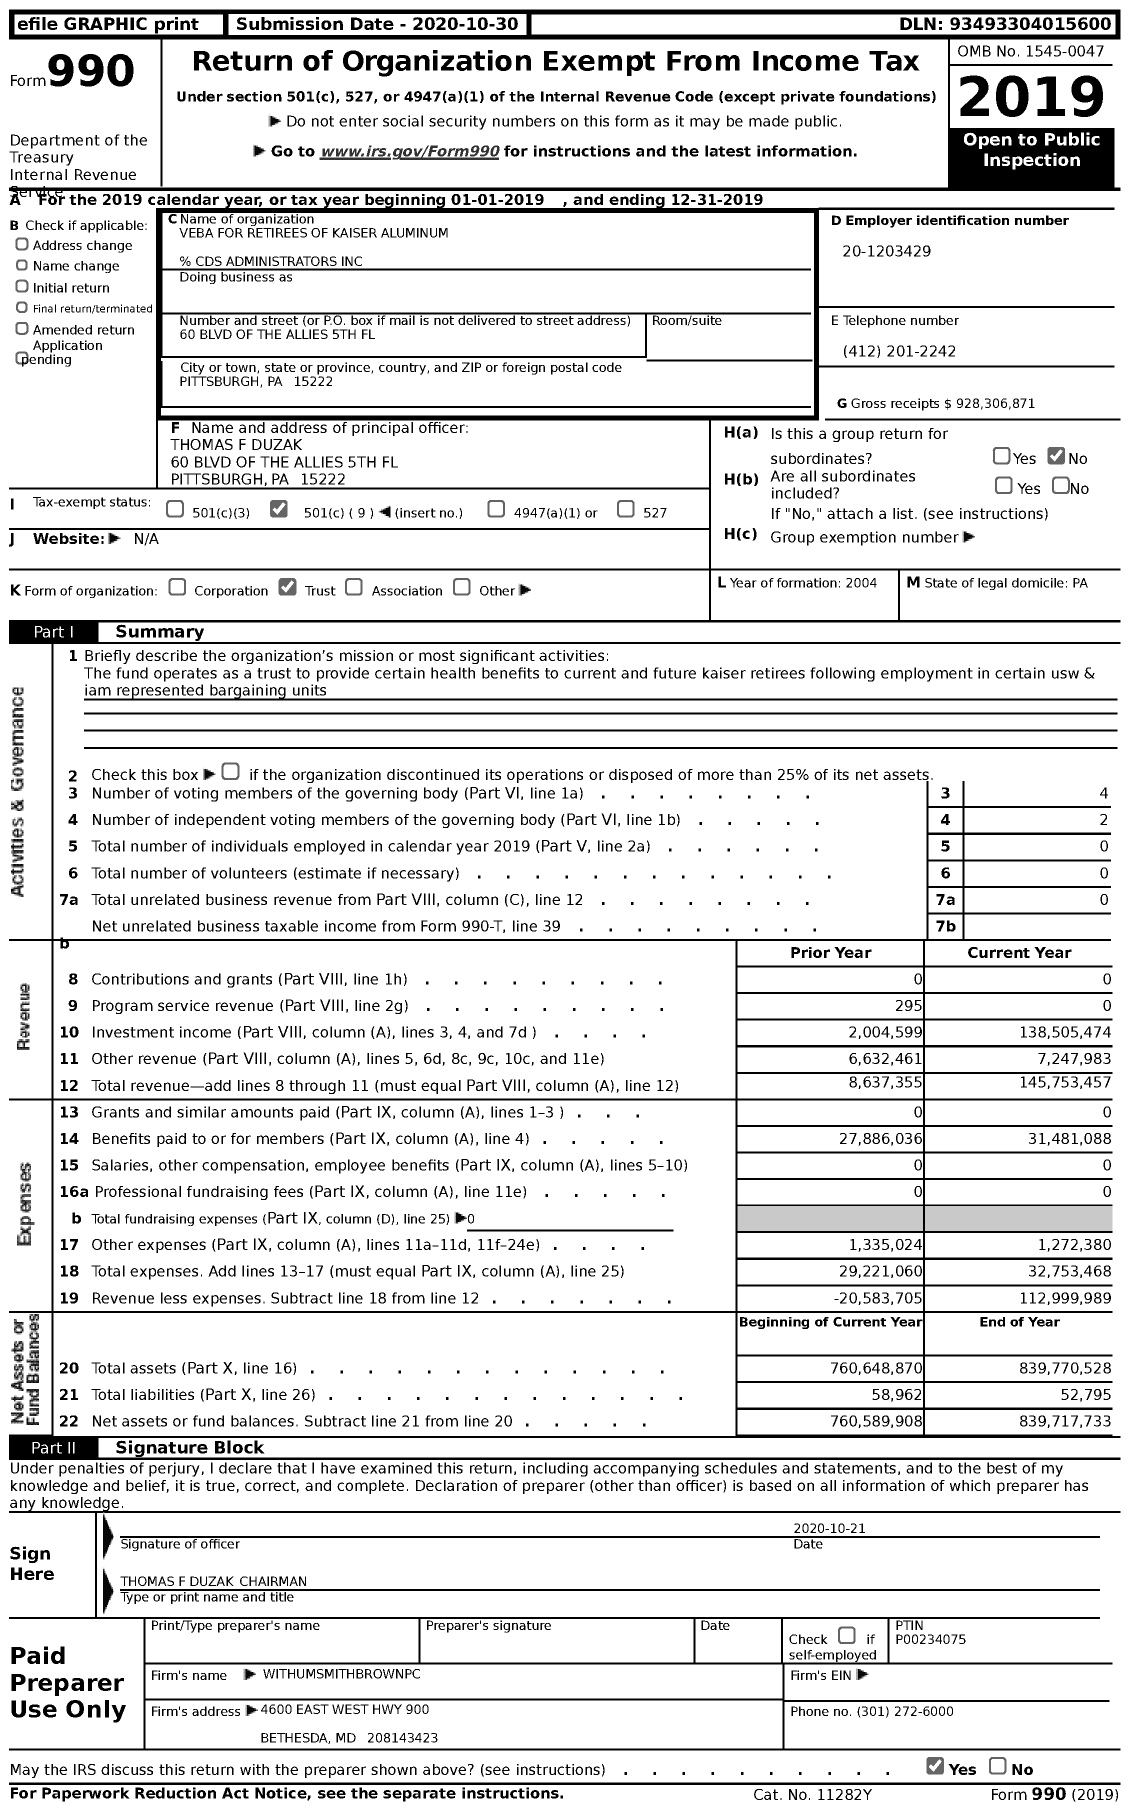 Image of first page of 2019 Form 990 for Veba for Retirees of Kaiser Aluminum